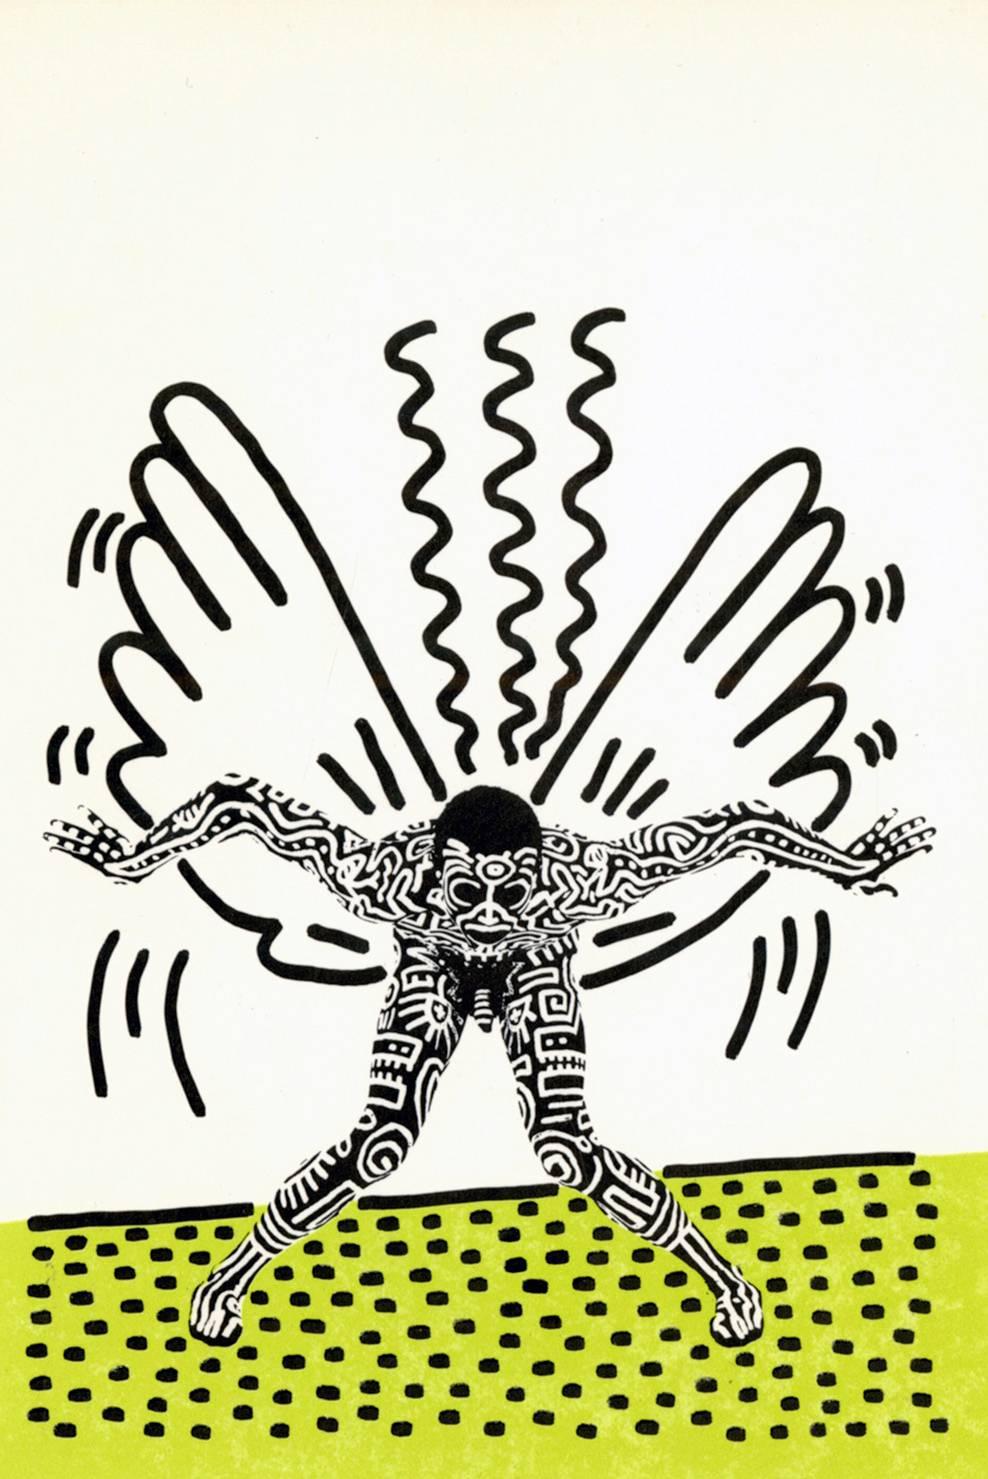 Into 84, Bill T. Jones, A Set of 3 Cards  - Photograph by Keith Haring